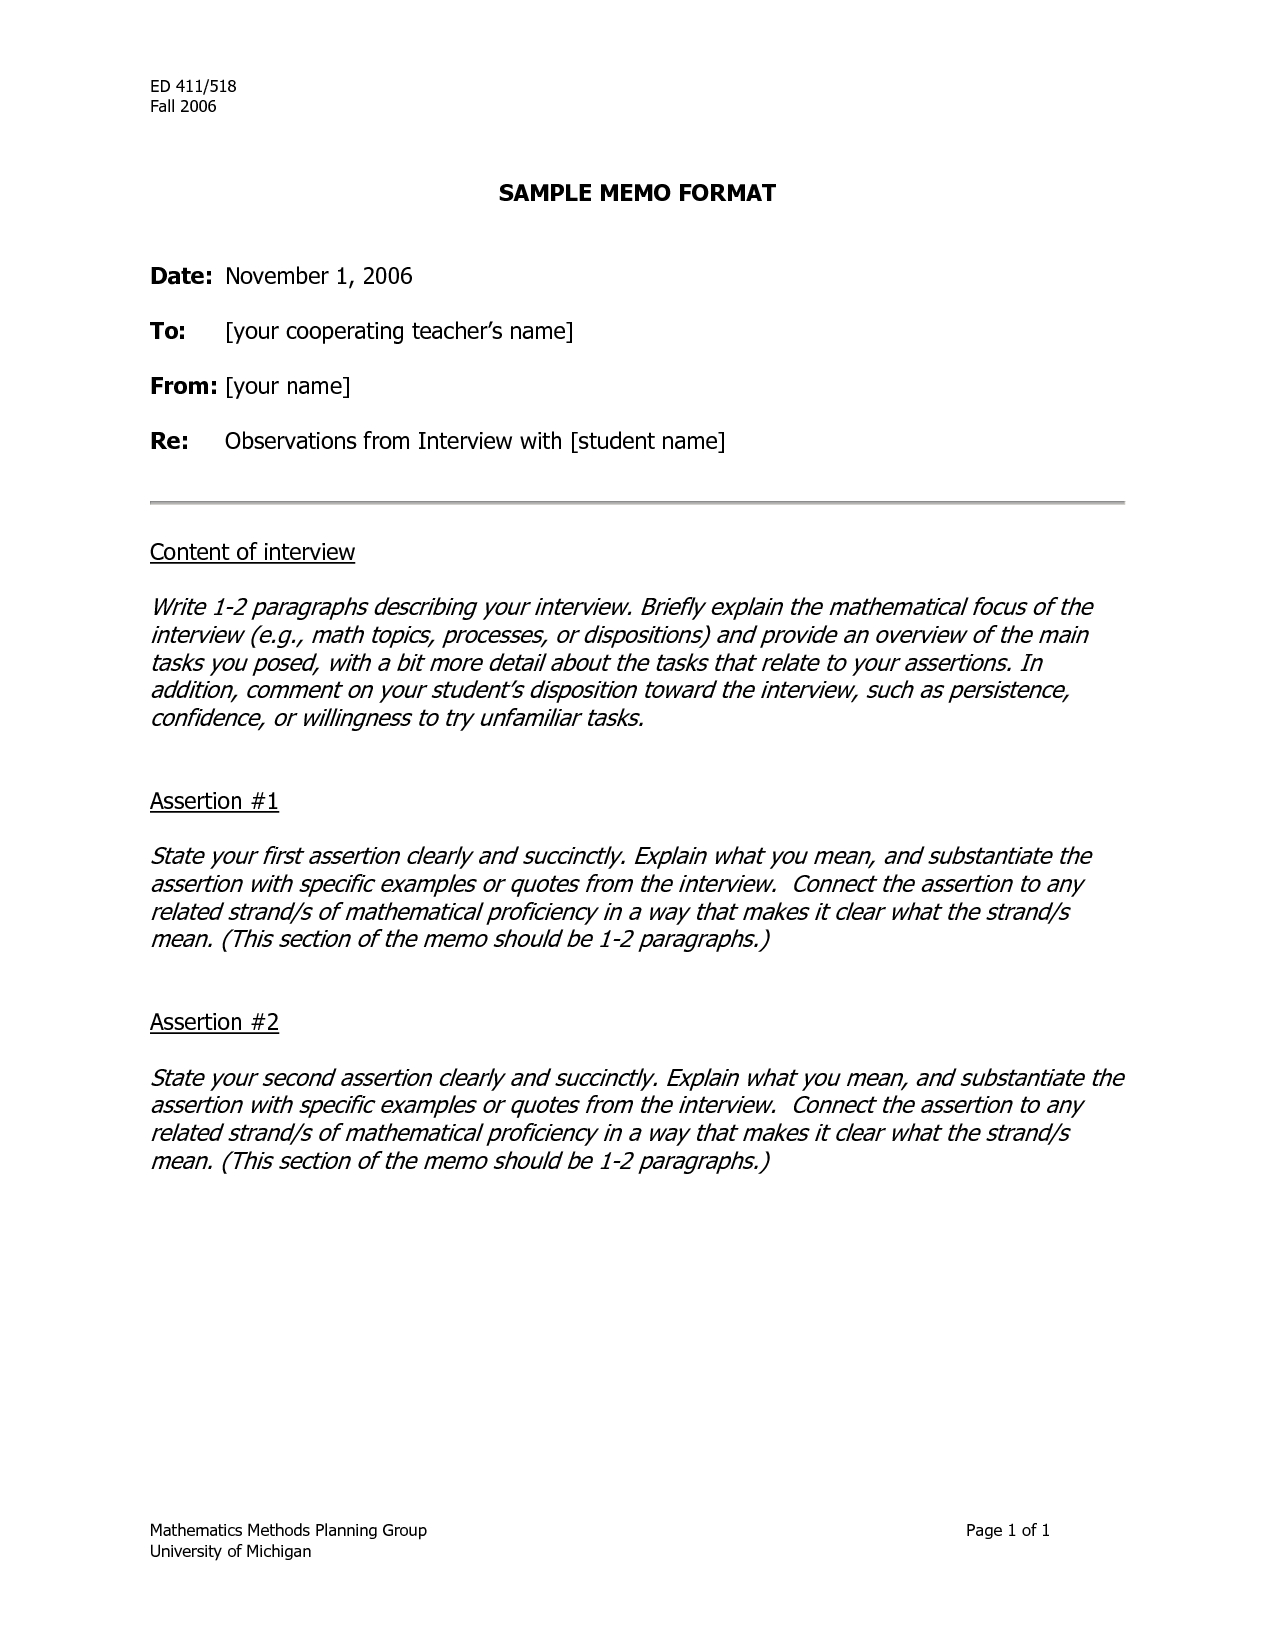 Sample Memo Templates – Google Search | Work Templates Throughout How To Write A Work Report Template